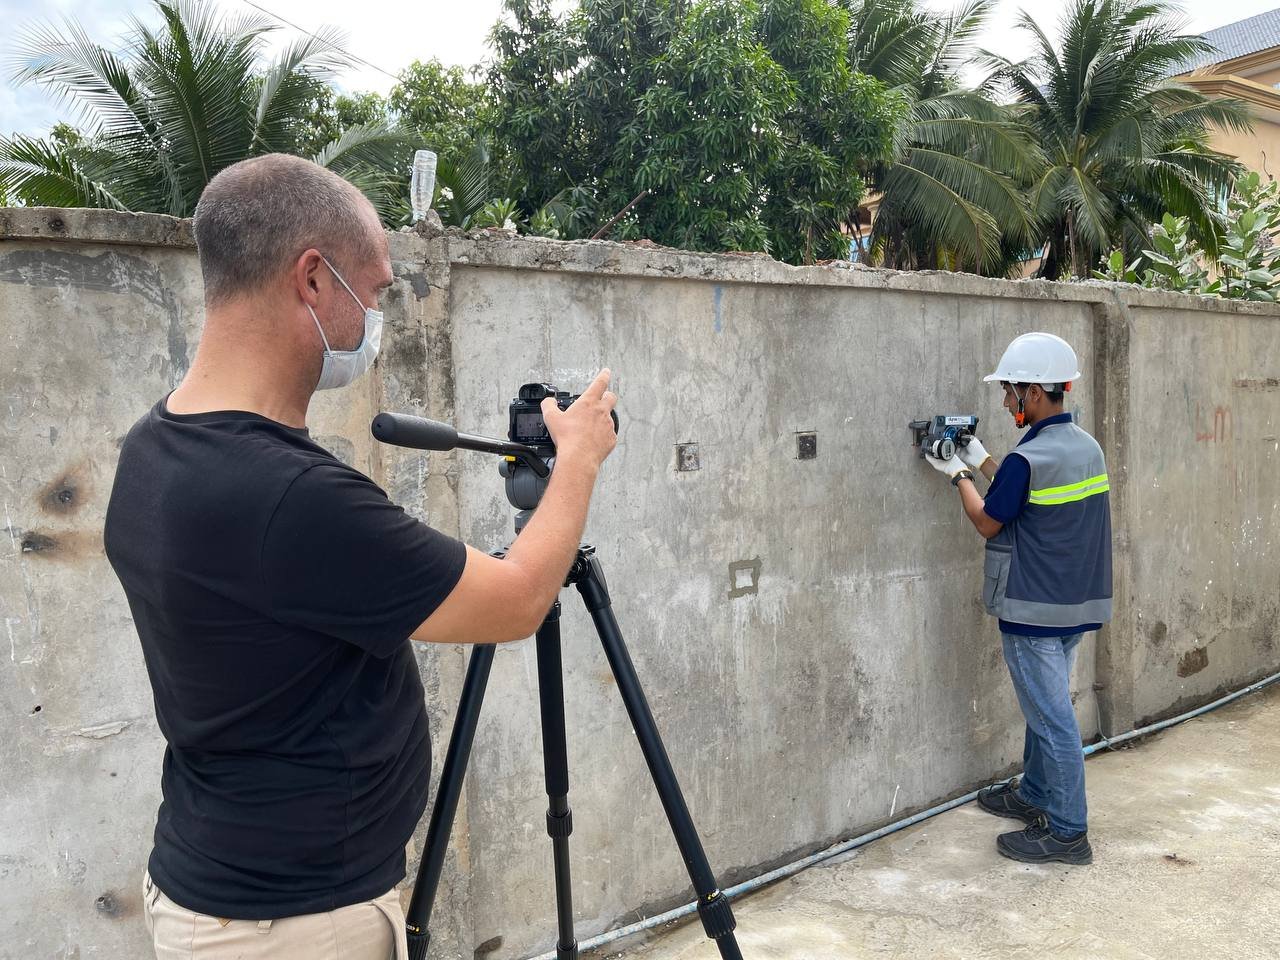 George filming a render test outside BECL offices in Phnom Penh